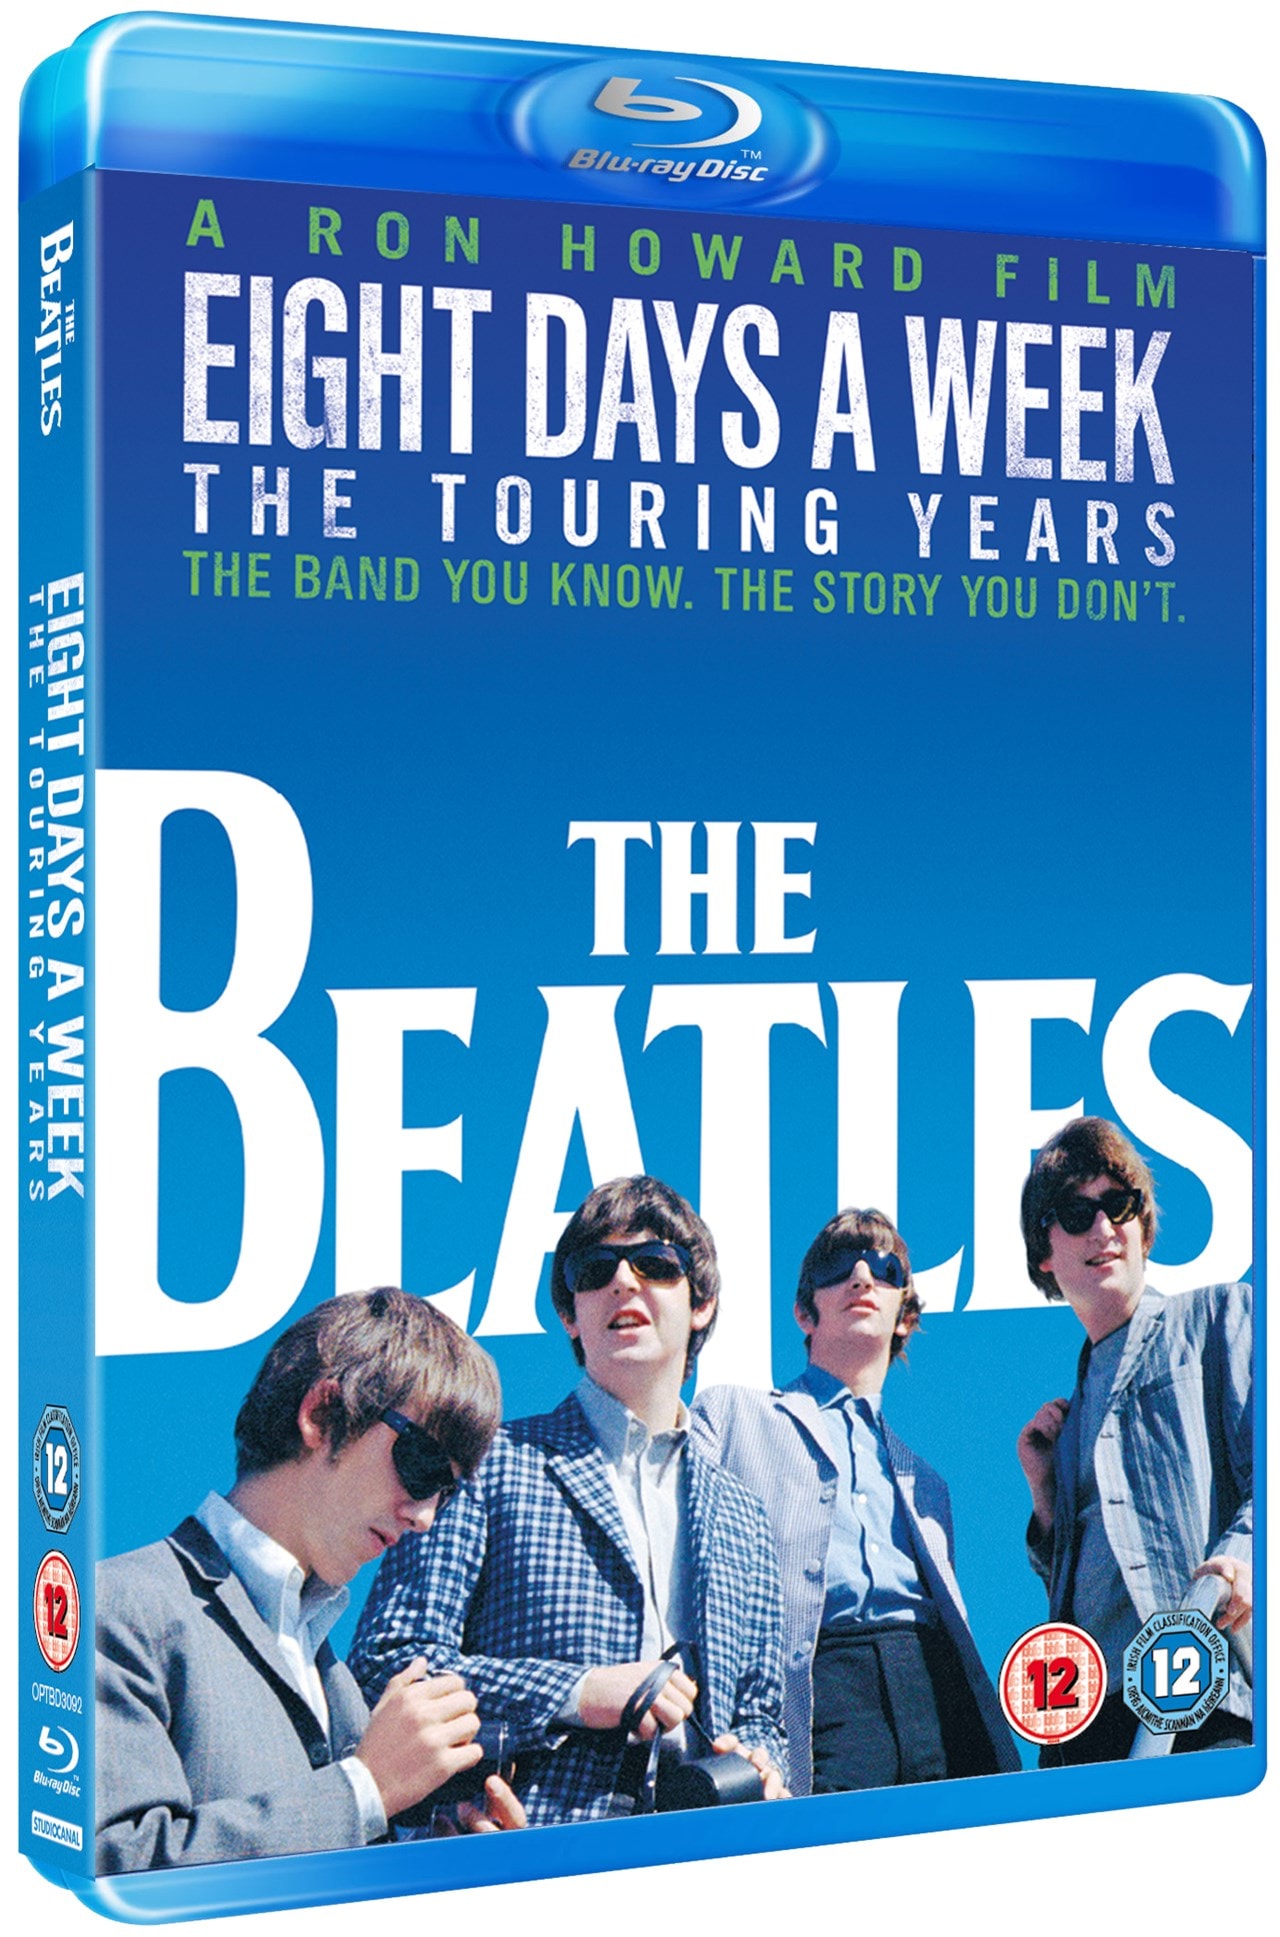 2016 The Beatles: Eight Days A Week - The Touring Years